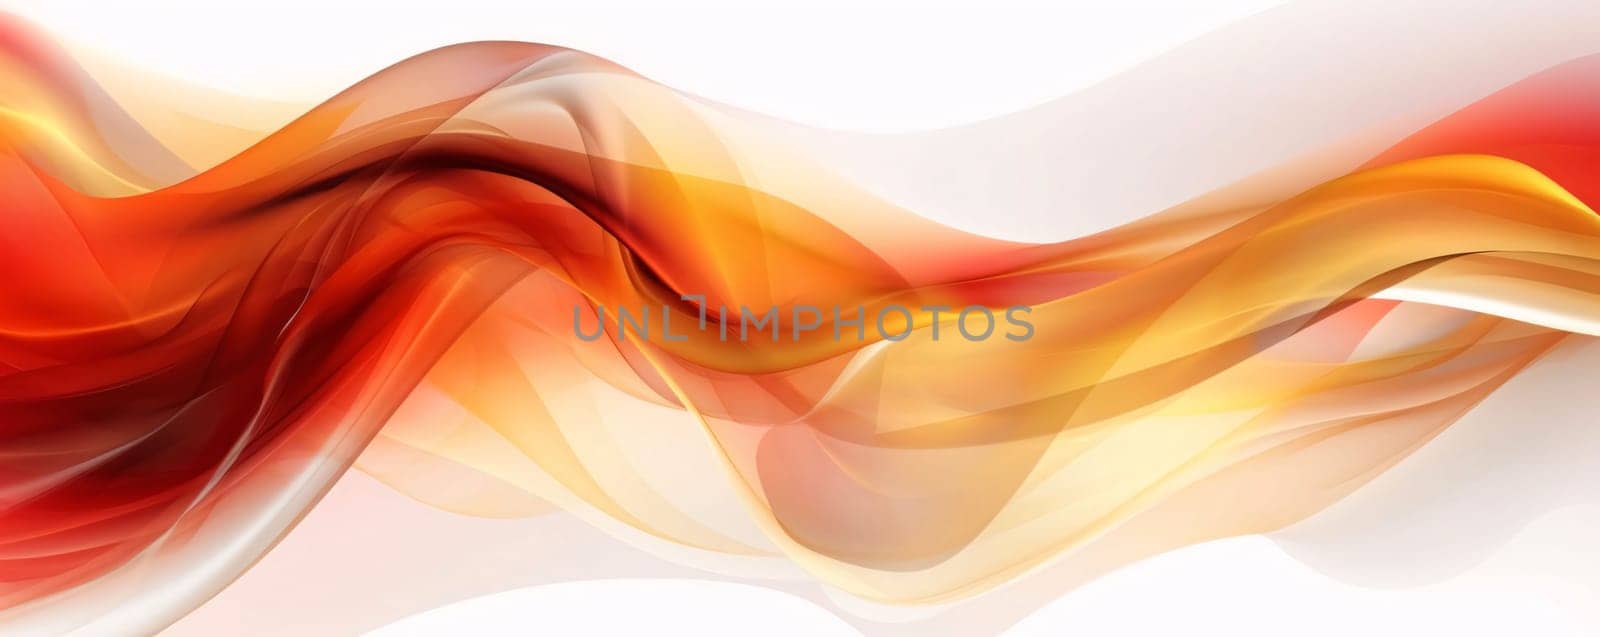 Abstract background design: abstract background with smooth flowing orange and red waves, vector illustration